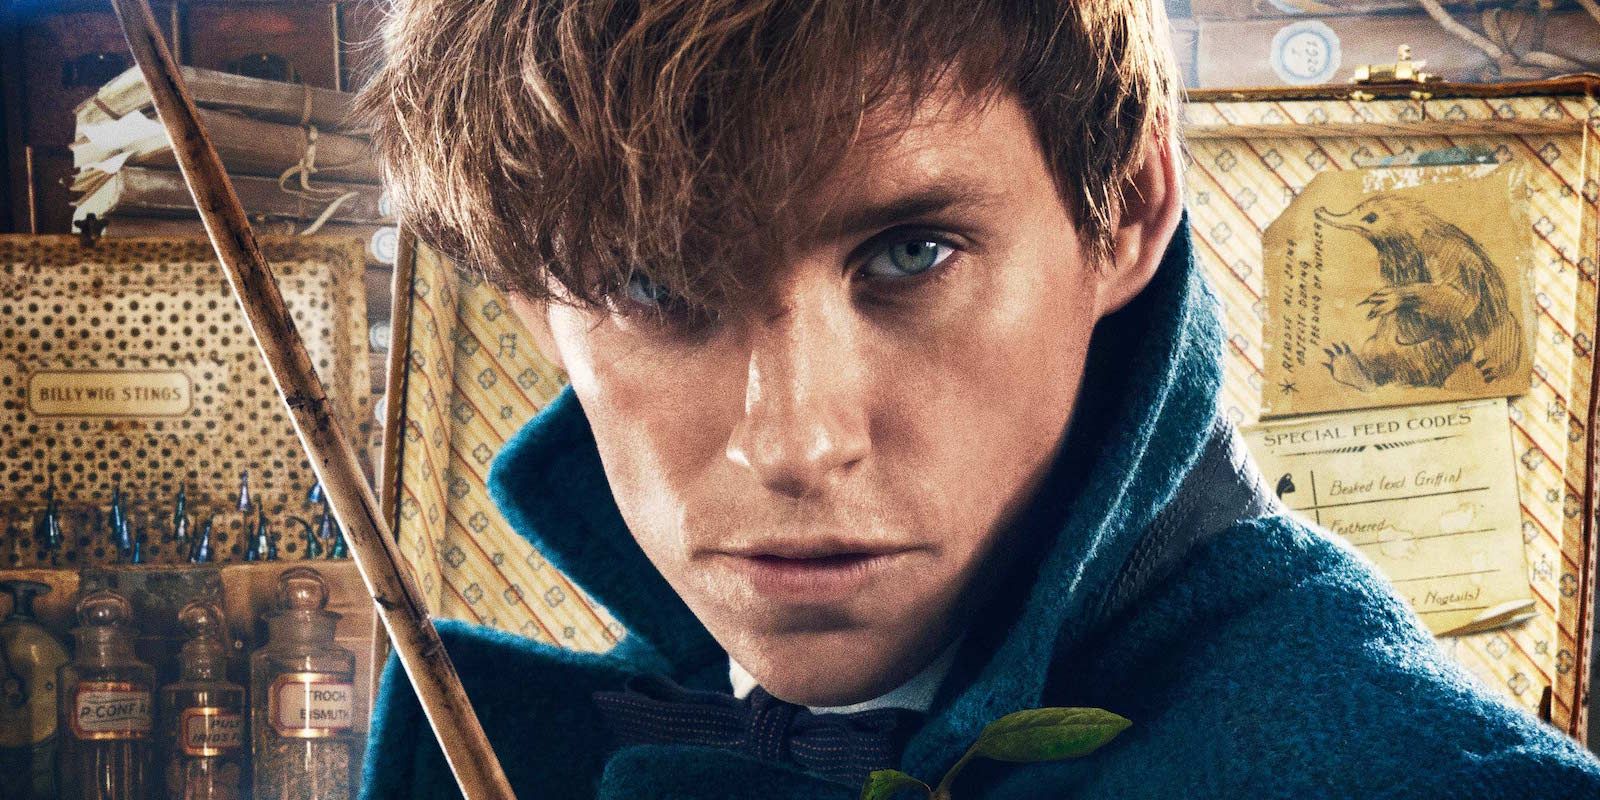 Fantastic Beasts Newt Scamander Backstory & Harry Potter Connections